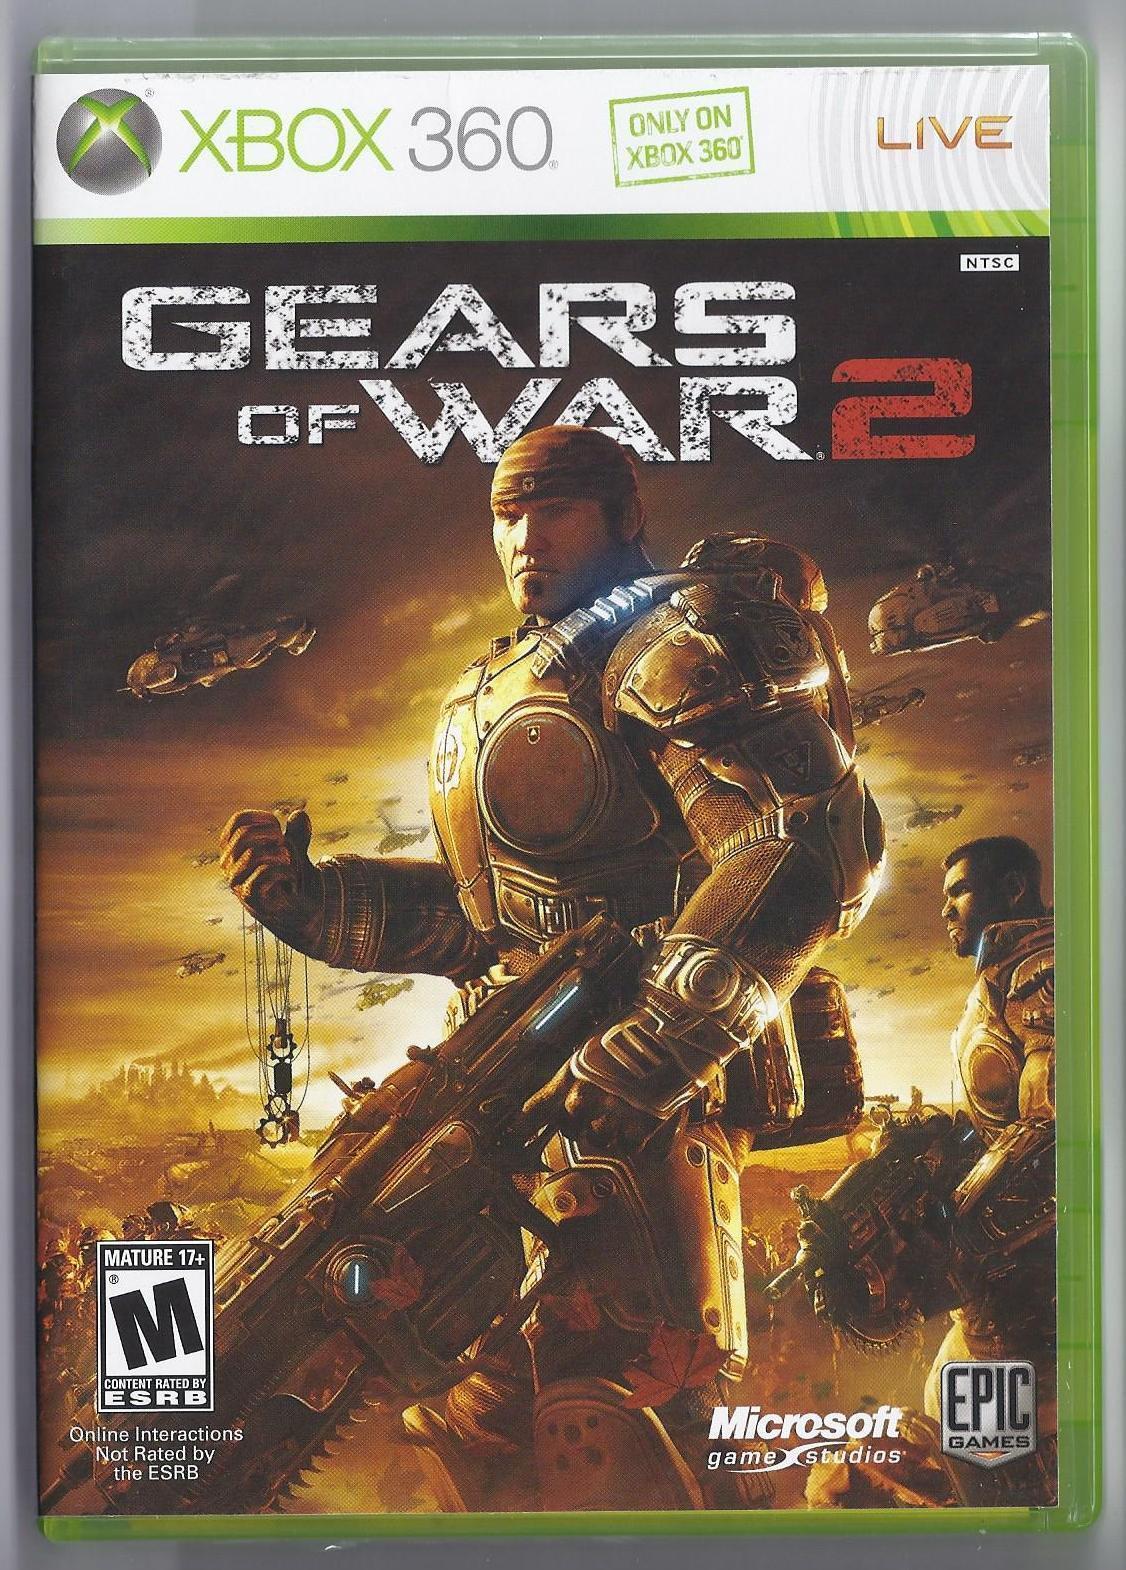 Primary image for Gears of War 2 (Xbox 360, 2008)